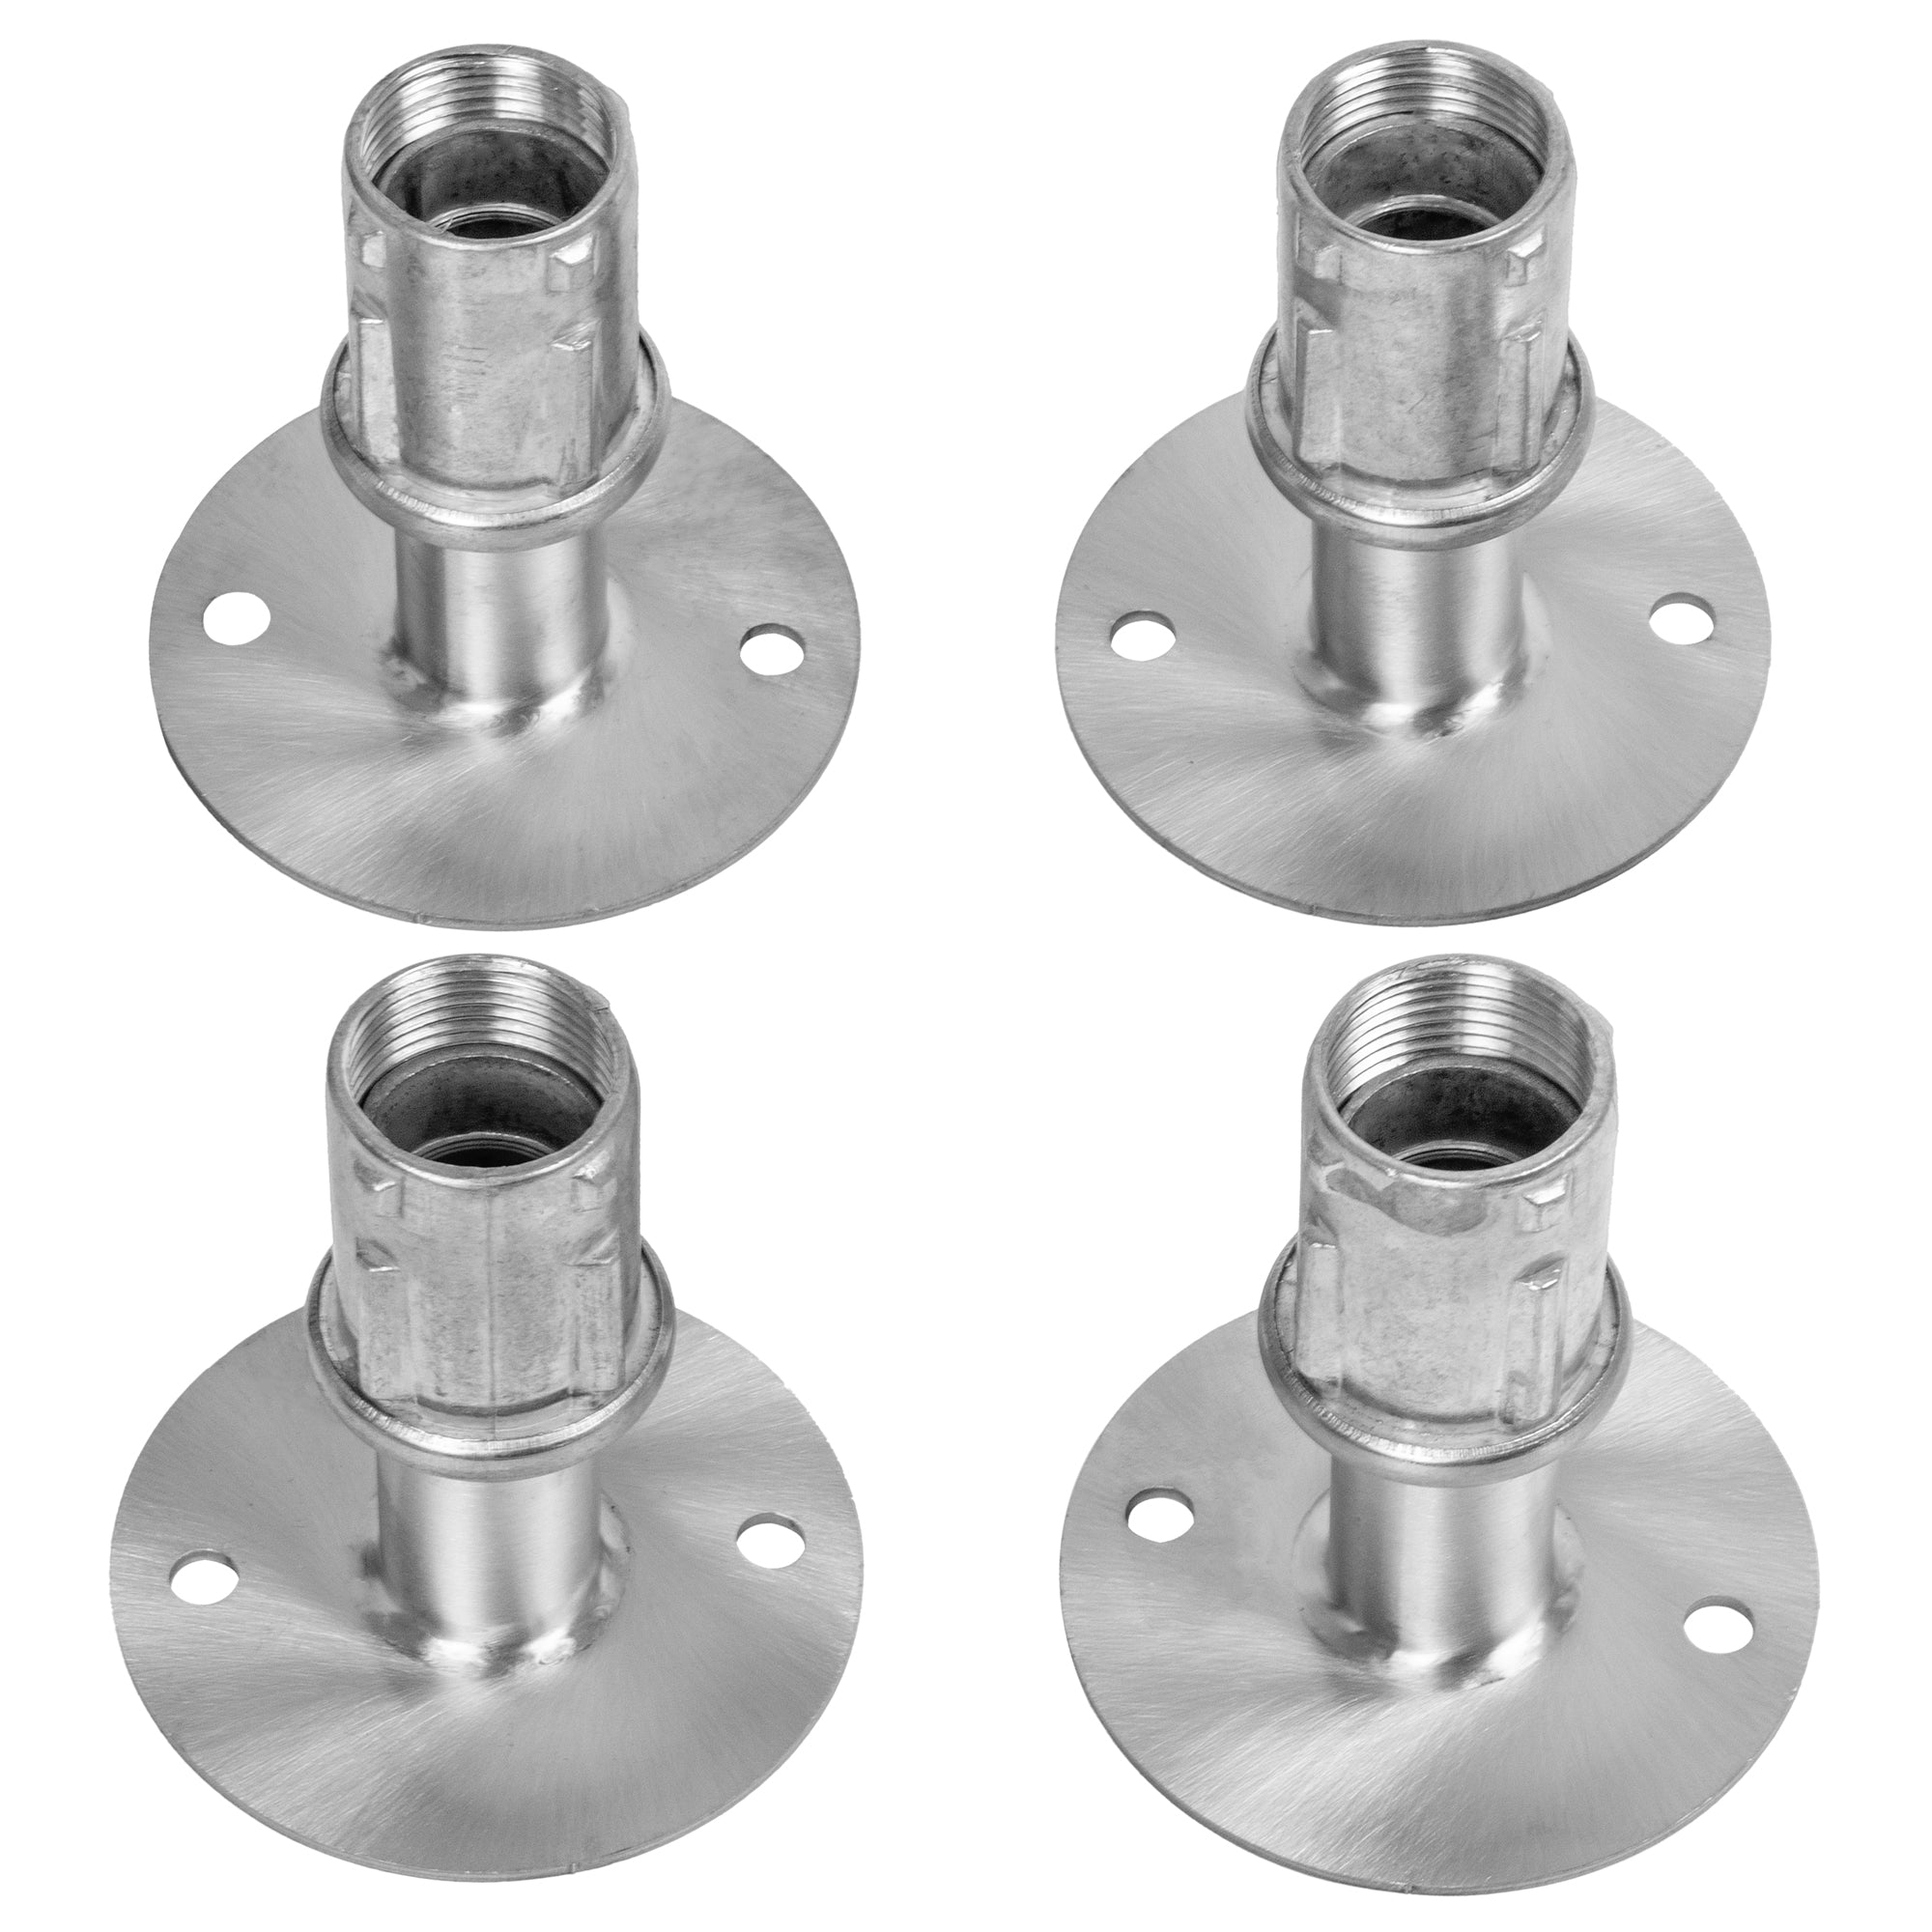 Leyso FT-SP3 Set of 4 Stainless Steel Flanged Feet 1” Adjustable w/ 3-½” Diameter Flange for Stainless Steel 1-⅝” O.D. Tubing (Flanged Foot)